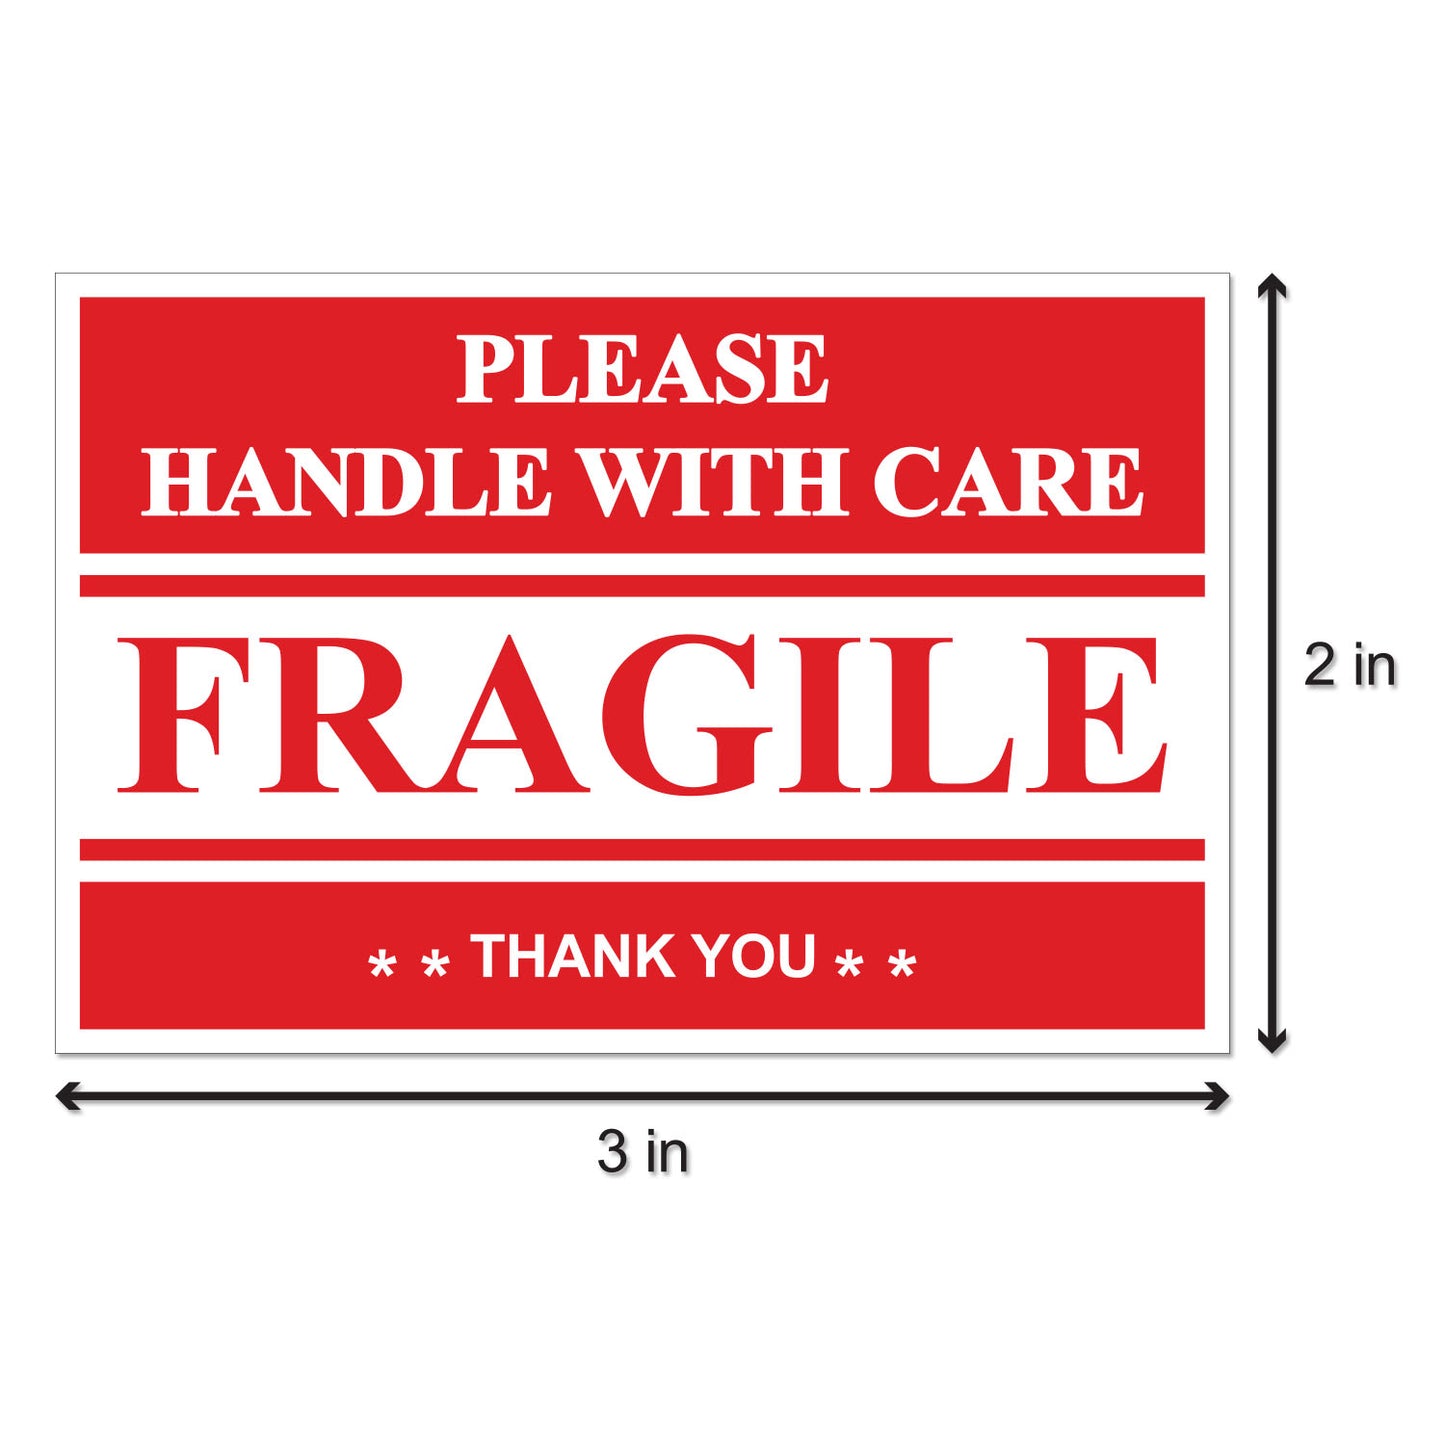 3 x 2 inch | Shipping & Handling: Fragile Stickers - Please Handle with Care